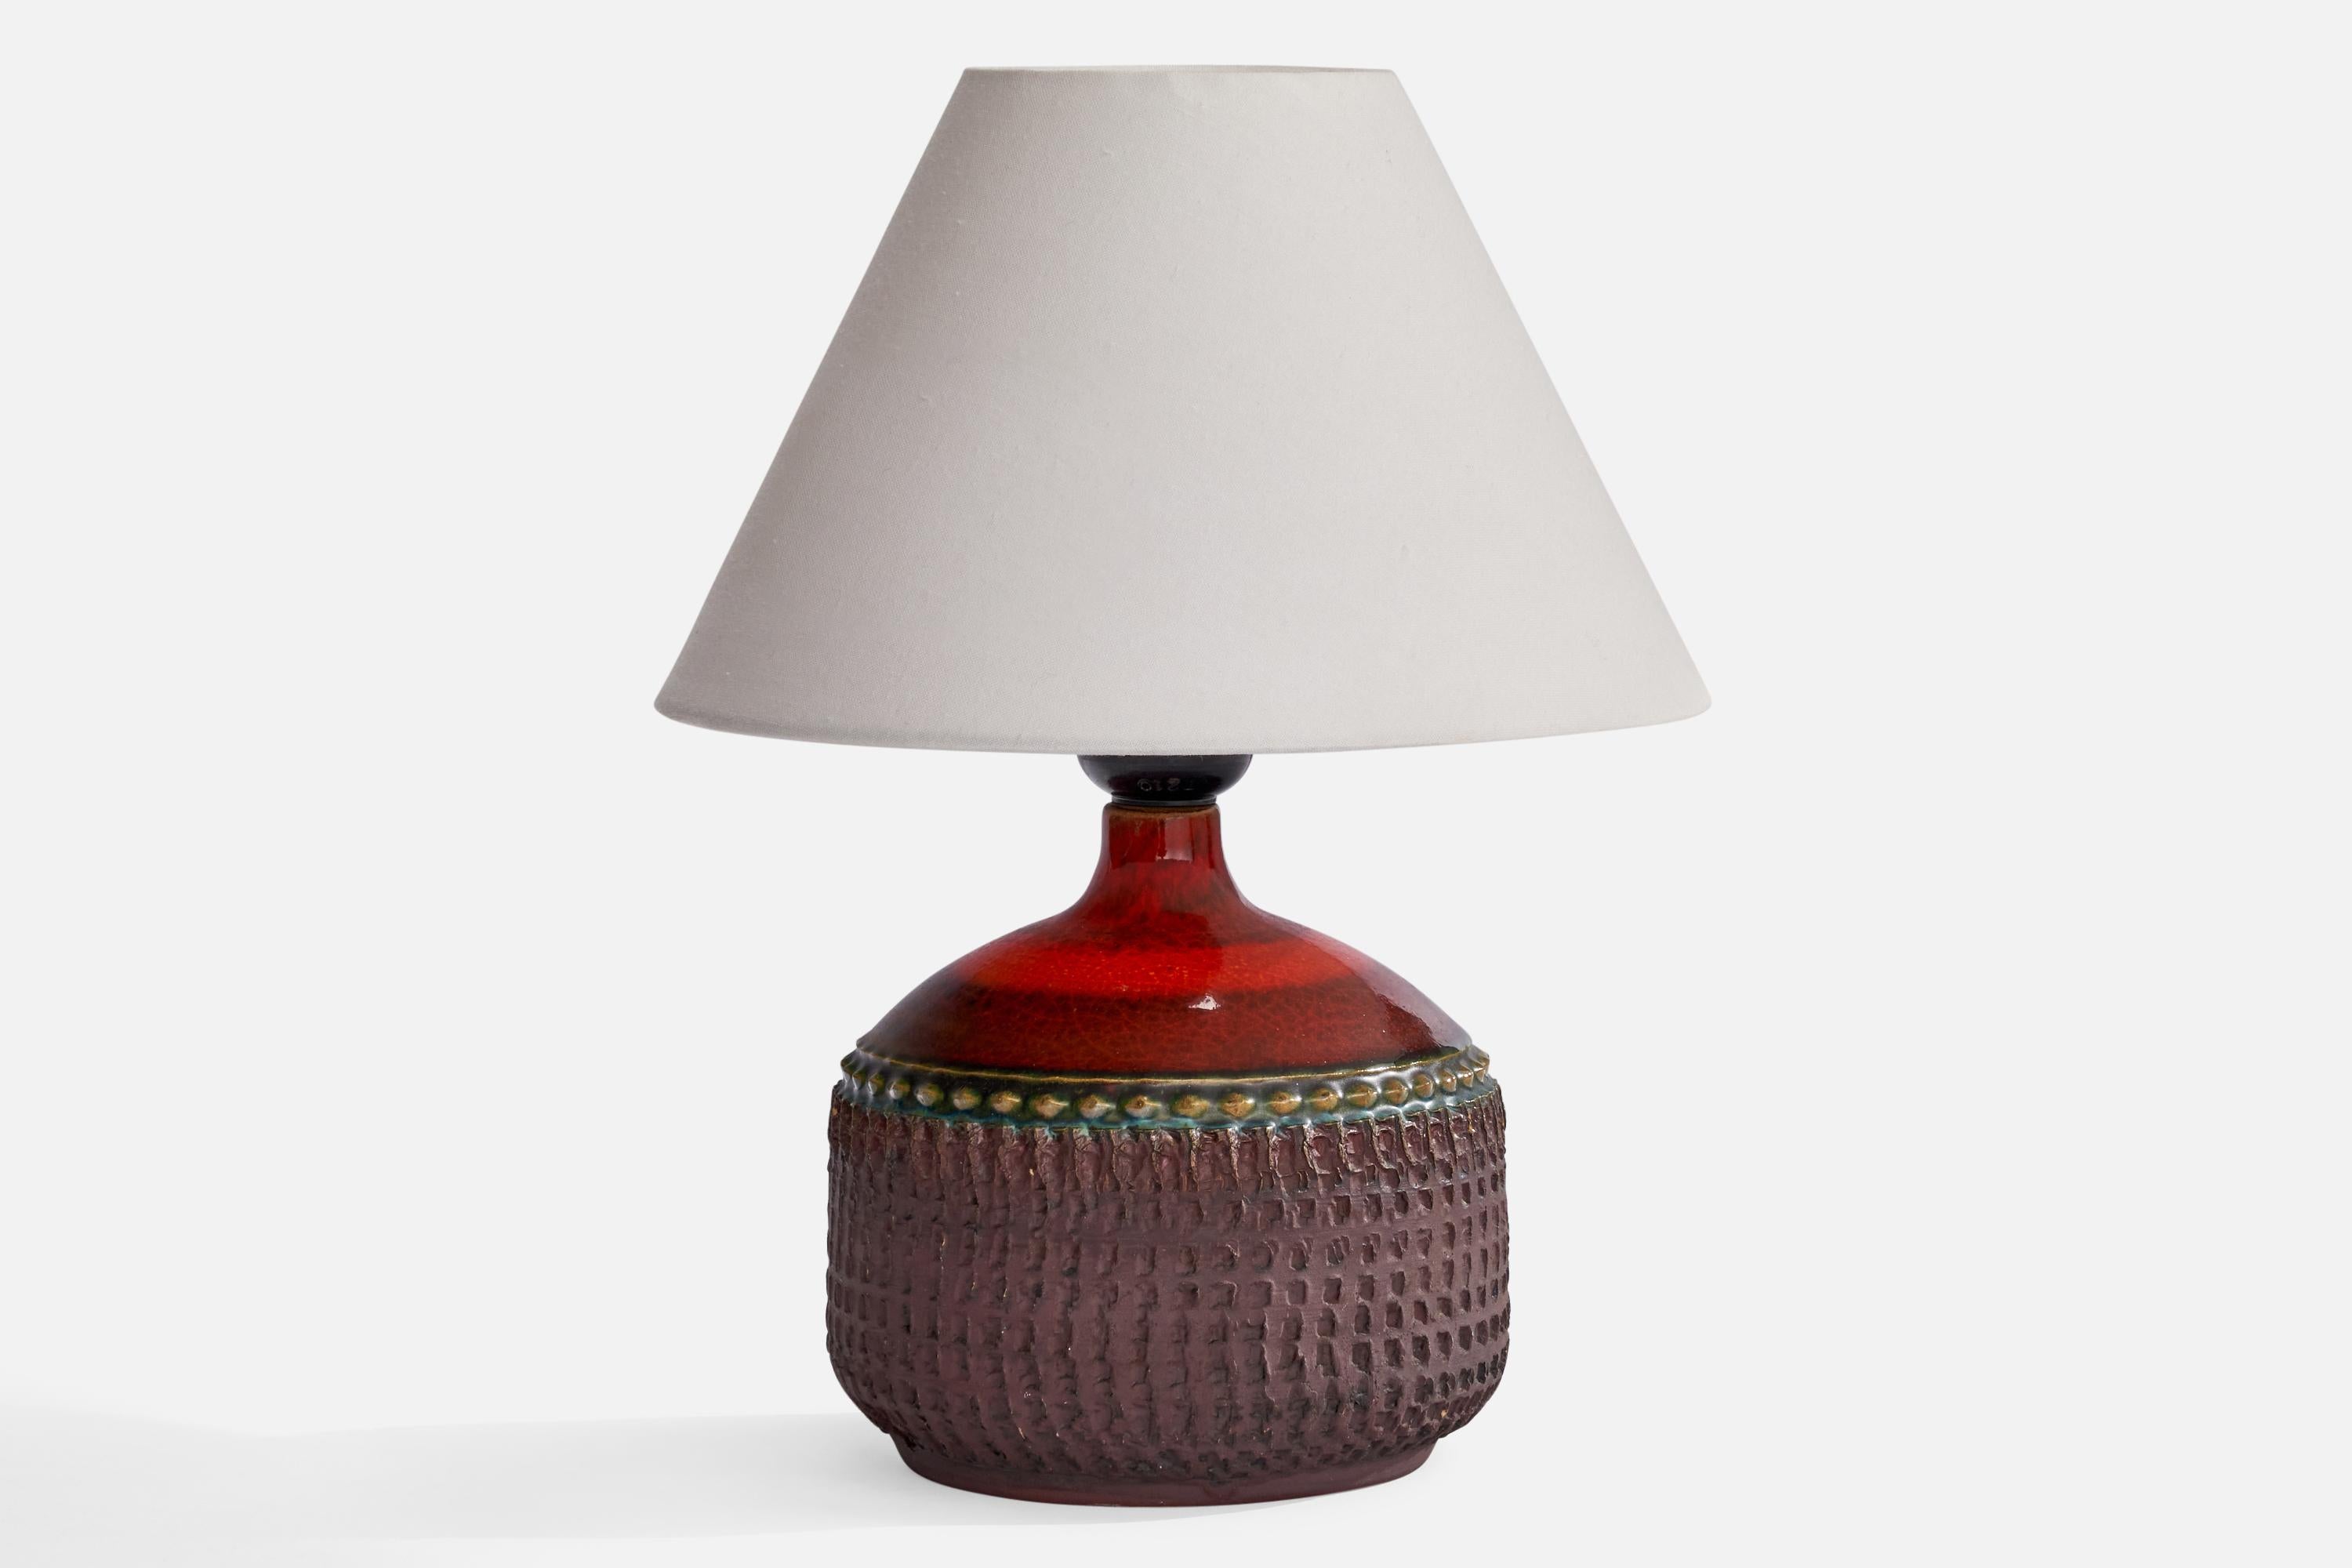 A red and purple-glazed stoneware table lamp designed and produced by Klase Höganäs, Sweden, 1960s.

Dimensions of Lamp (inches): 7.5” H x 5” Diameter
Dimensions of Shade (inches): 3” Top Diameter x 8”  Bottom Diameter x 5.5” H
Dimensions of Lamp